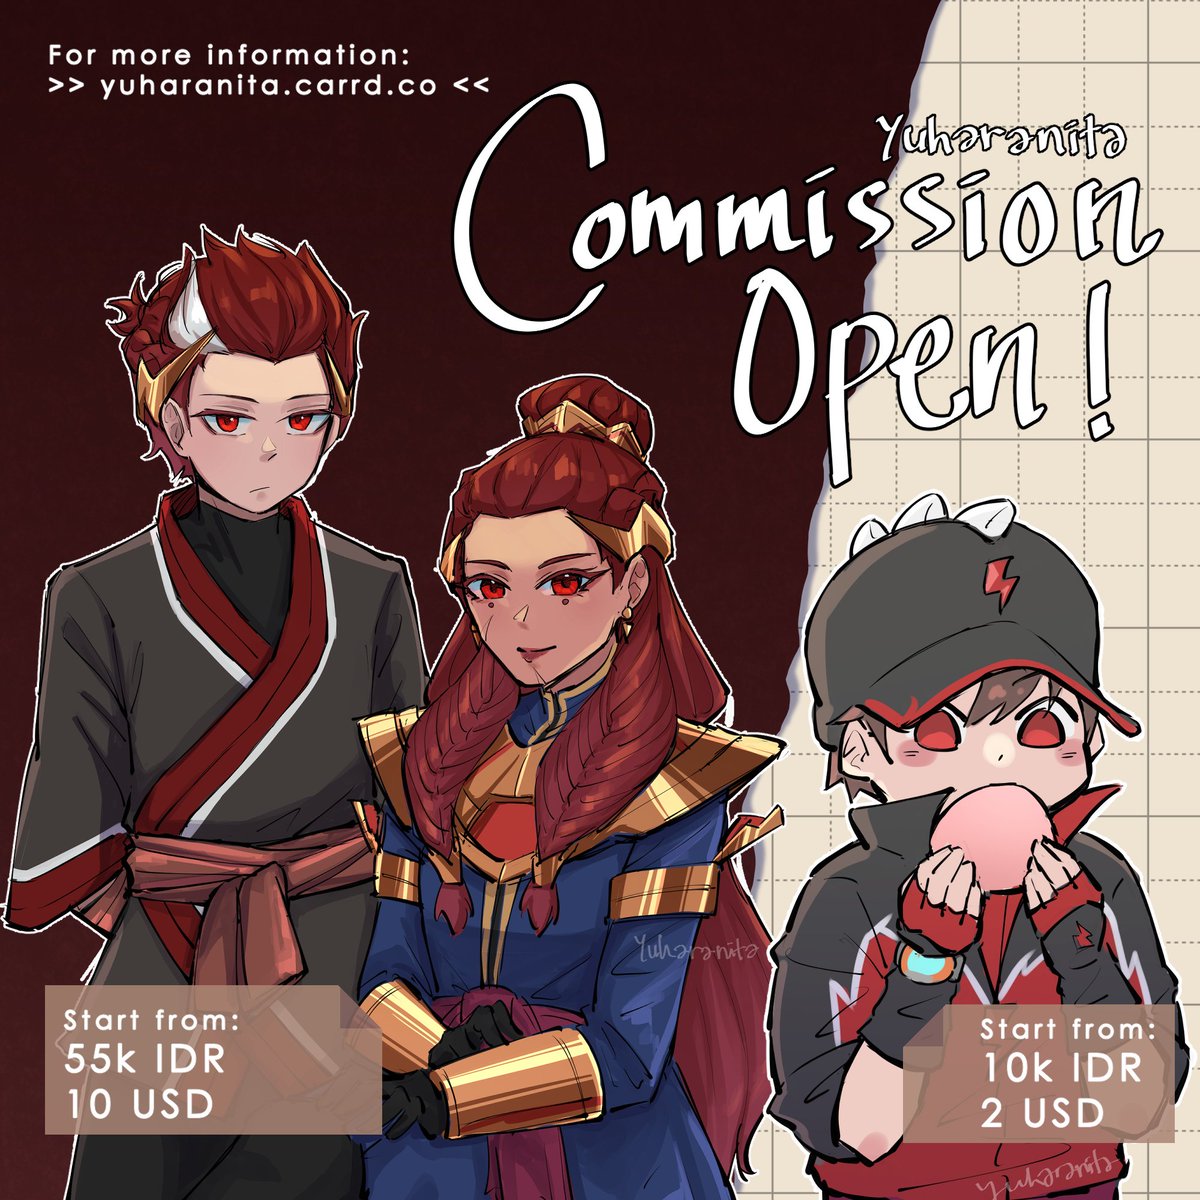 [ Commission Open ! ]
Local & International
.
Available for 3 slots only for this month!
More information: yuharanita.carrd.co

#opencommissions #ArtCommission